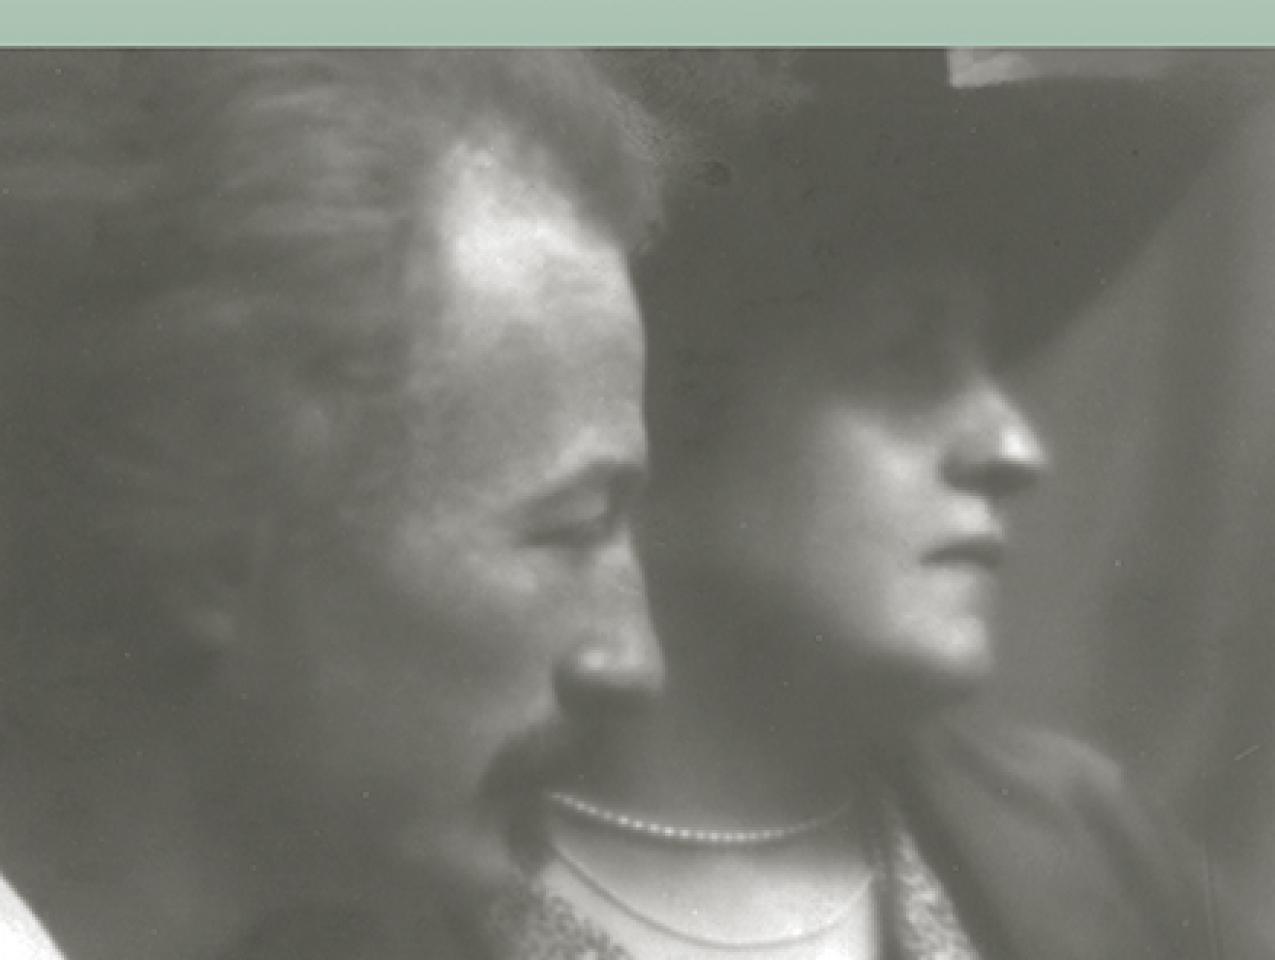 Helena Paderewska's memoirs are now available from the Hoover Press